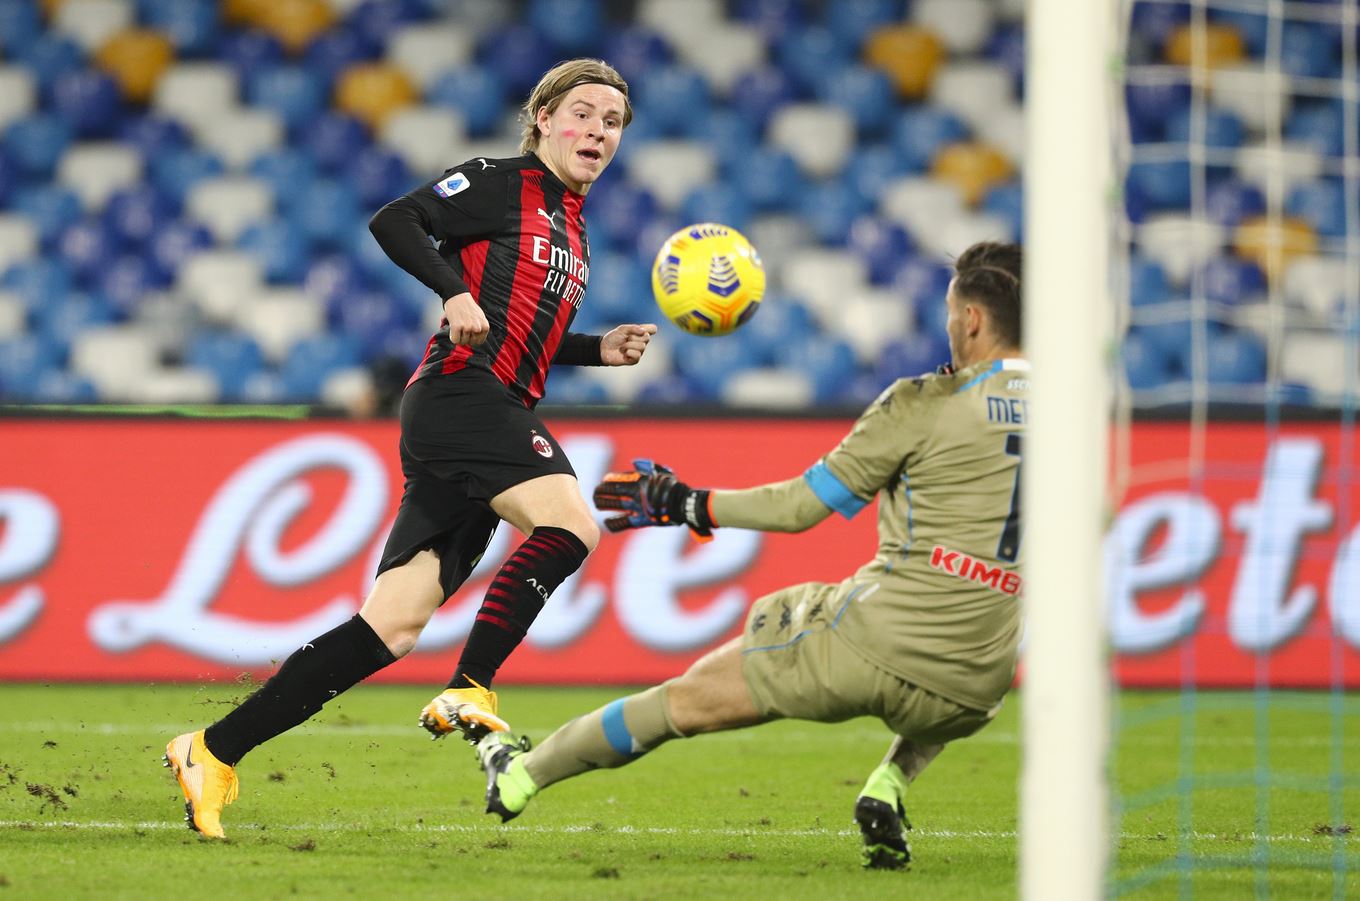 Jens Petter Hauge's first Serie A goal wrapped Sunday night's Milan win over Napoli and preserved the Rossoneri's solitary lead in the table